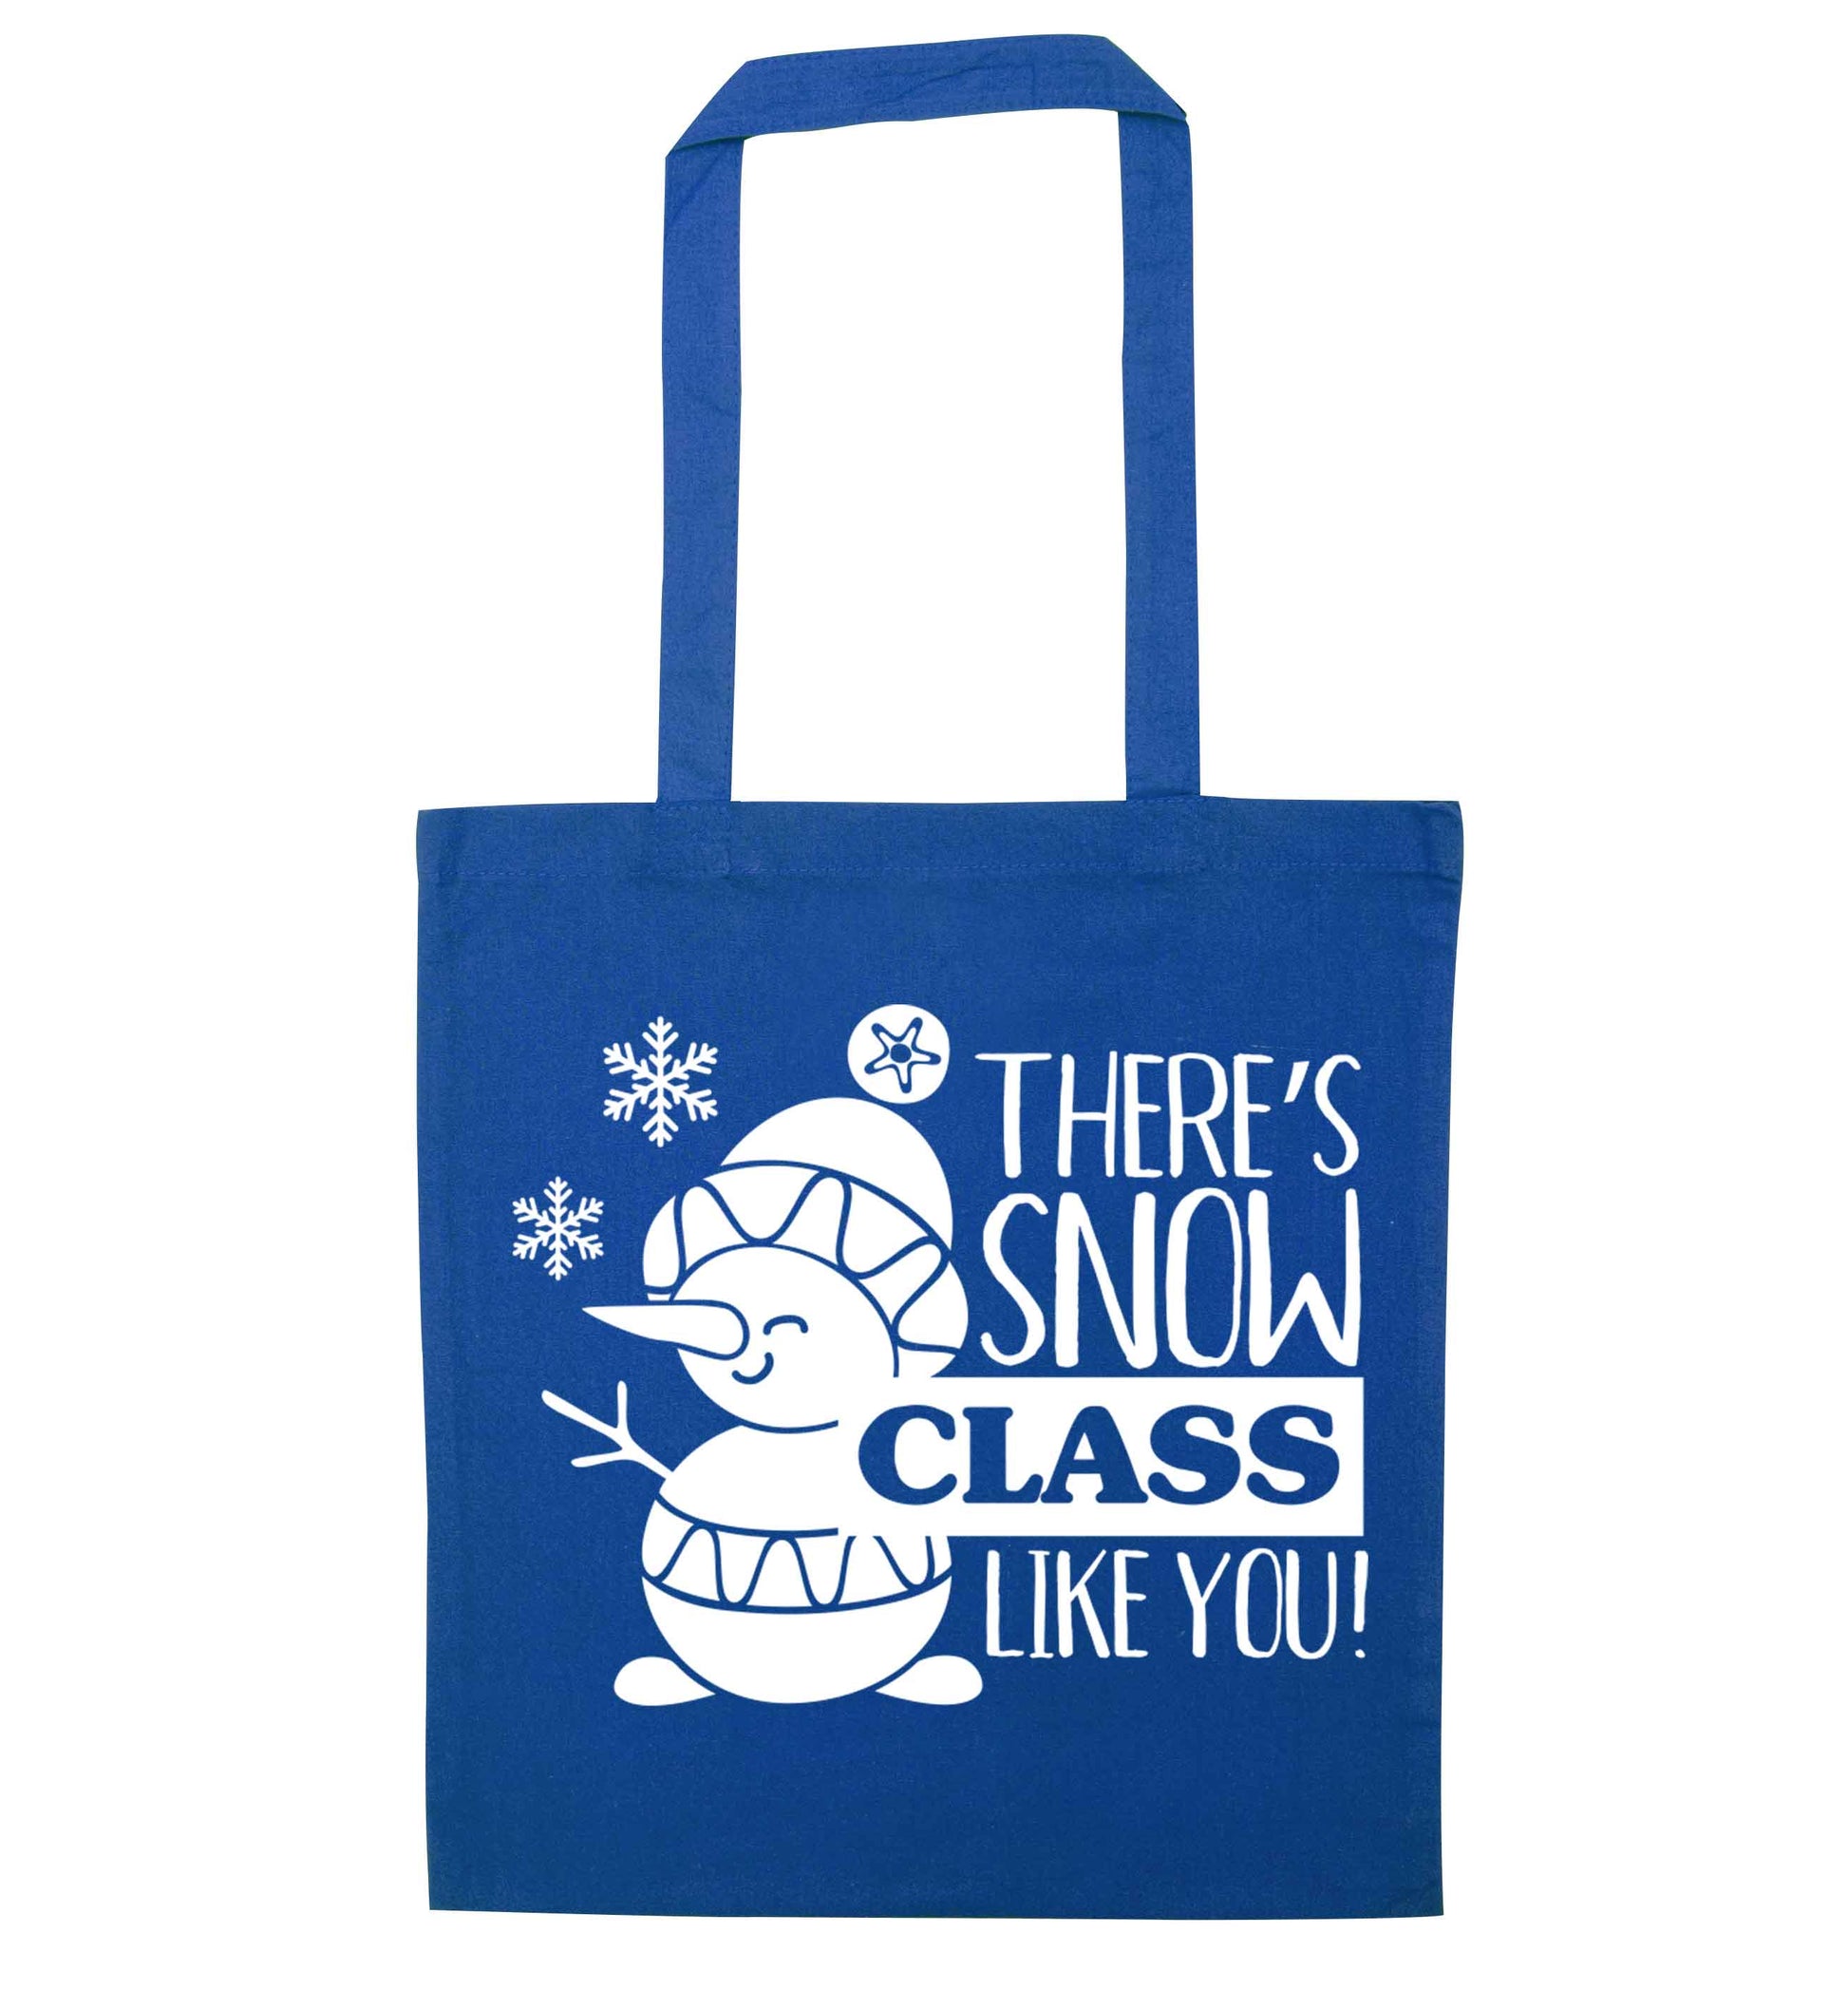 There's snow class like you blue tote bag